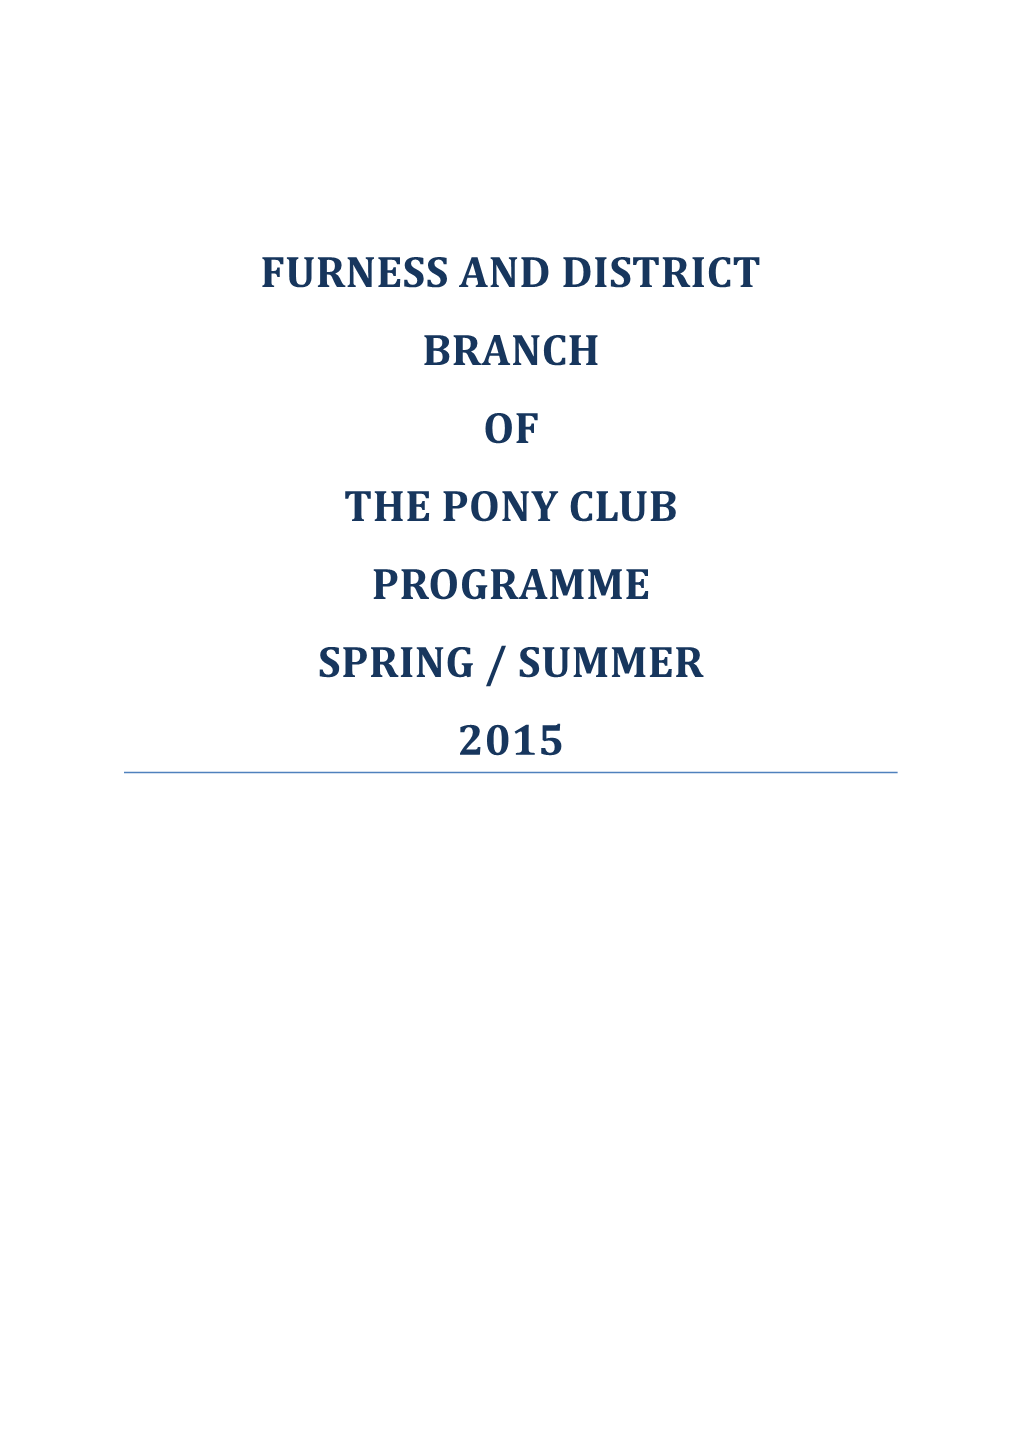 Furness and District Branch of the Pony Club Committee s1